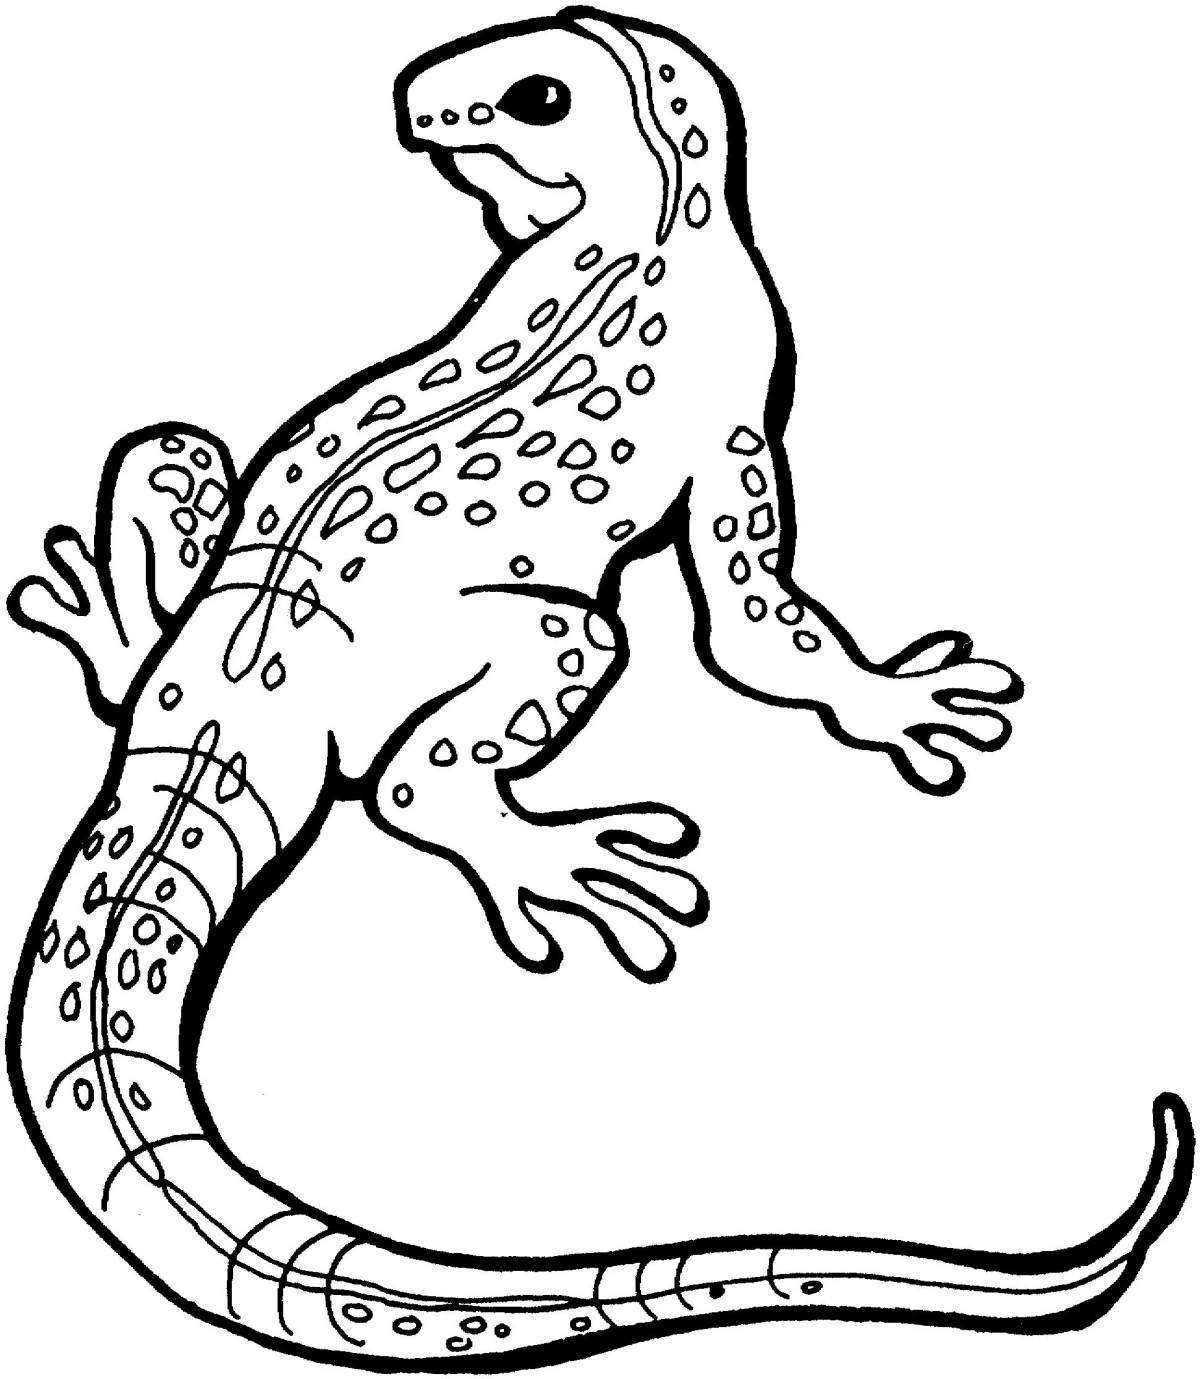 Dazzling reptile coloring pages